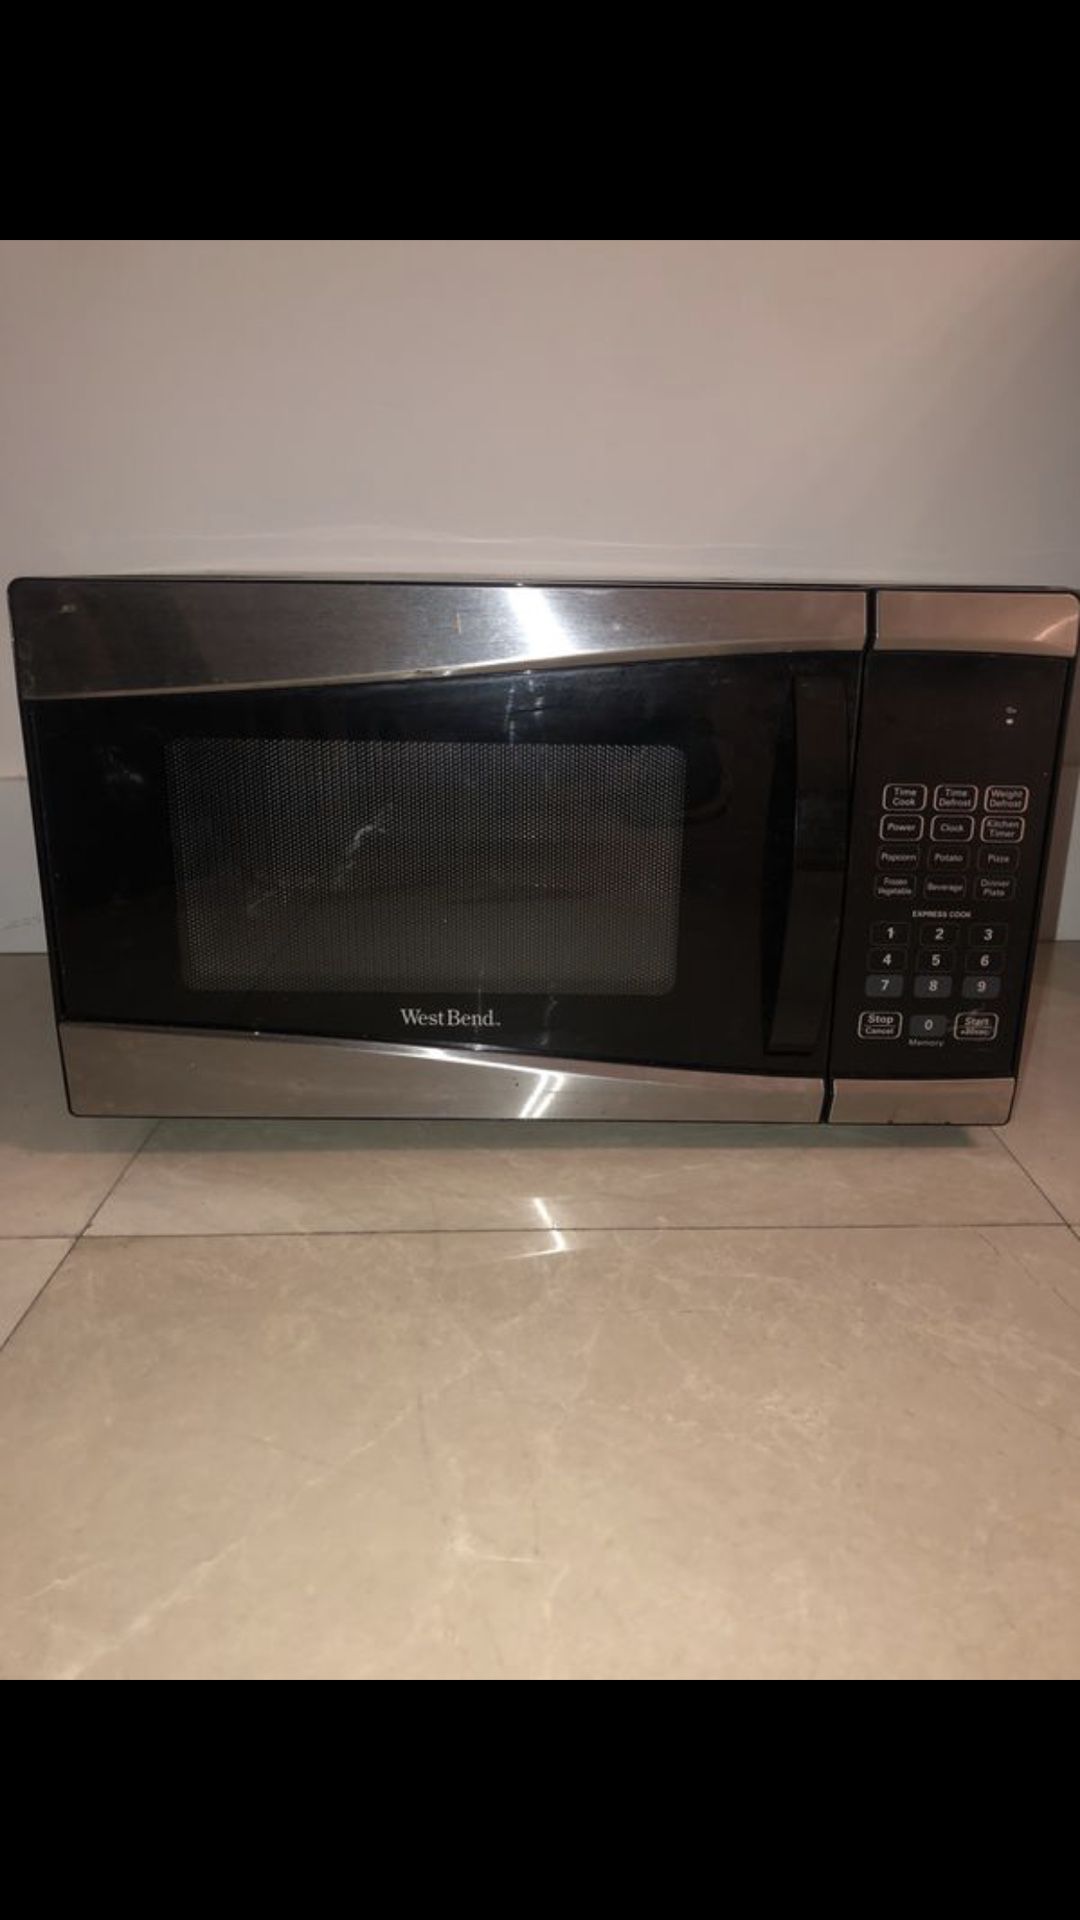 Microwave - very good condition - Brickell area